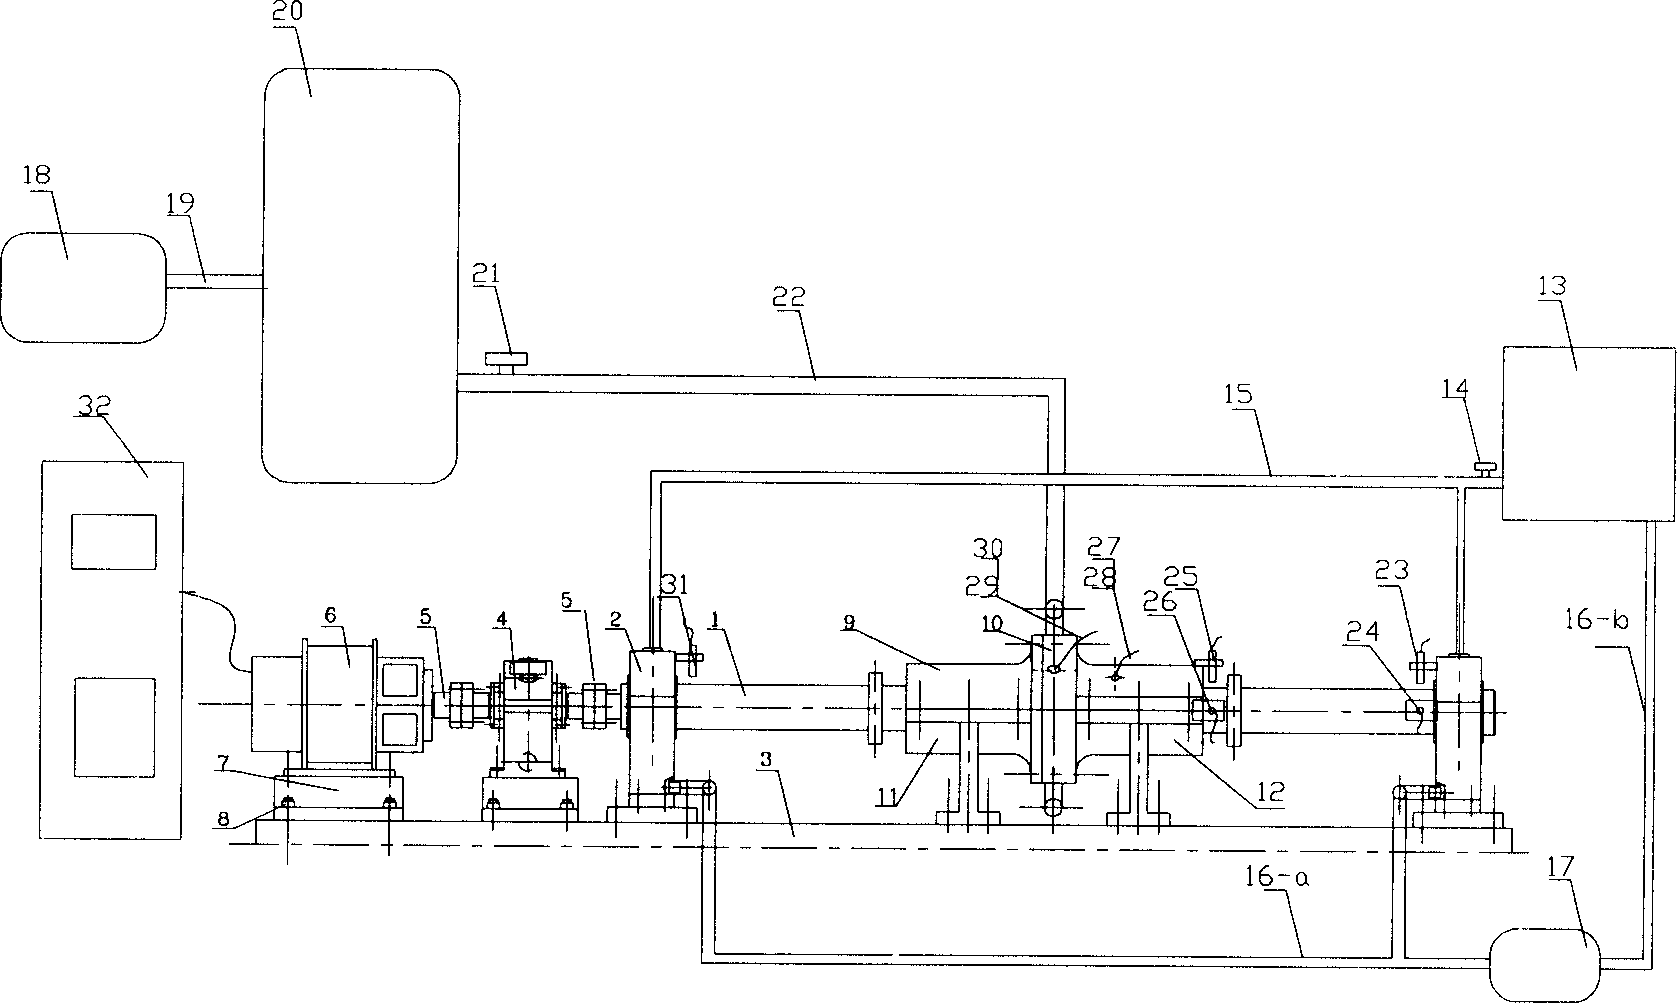 Apparatus for simulating airflow exciting-vibration in high-speed rotating machine and testing vibration